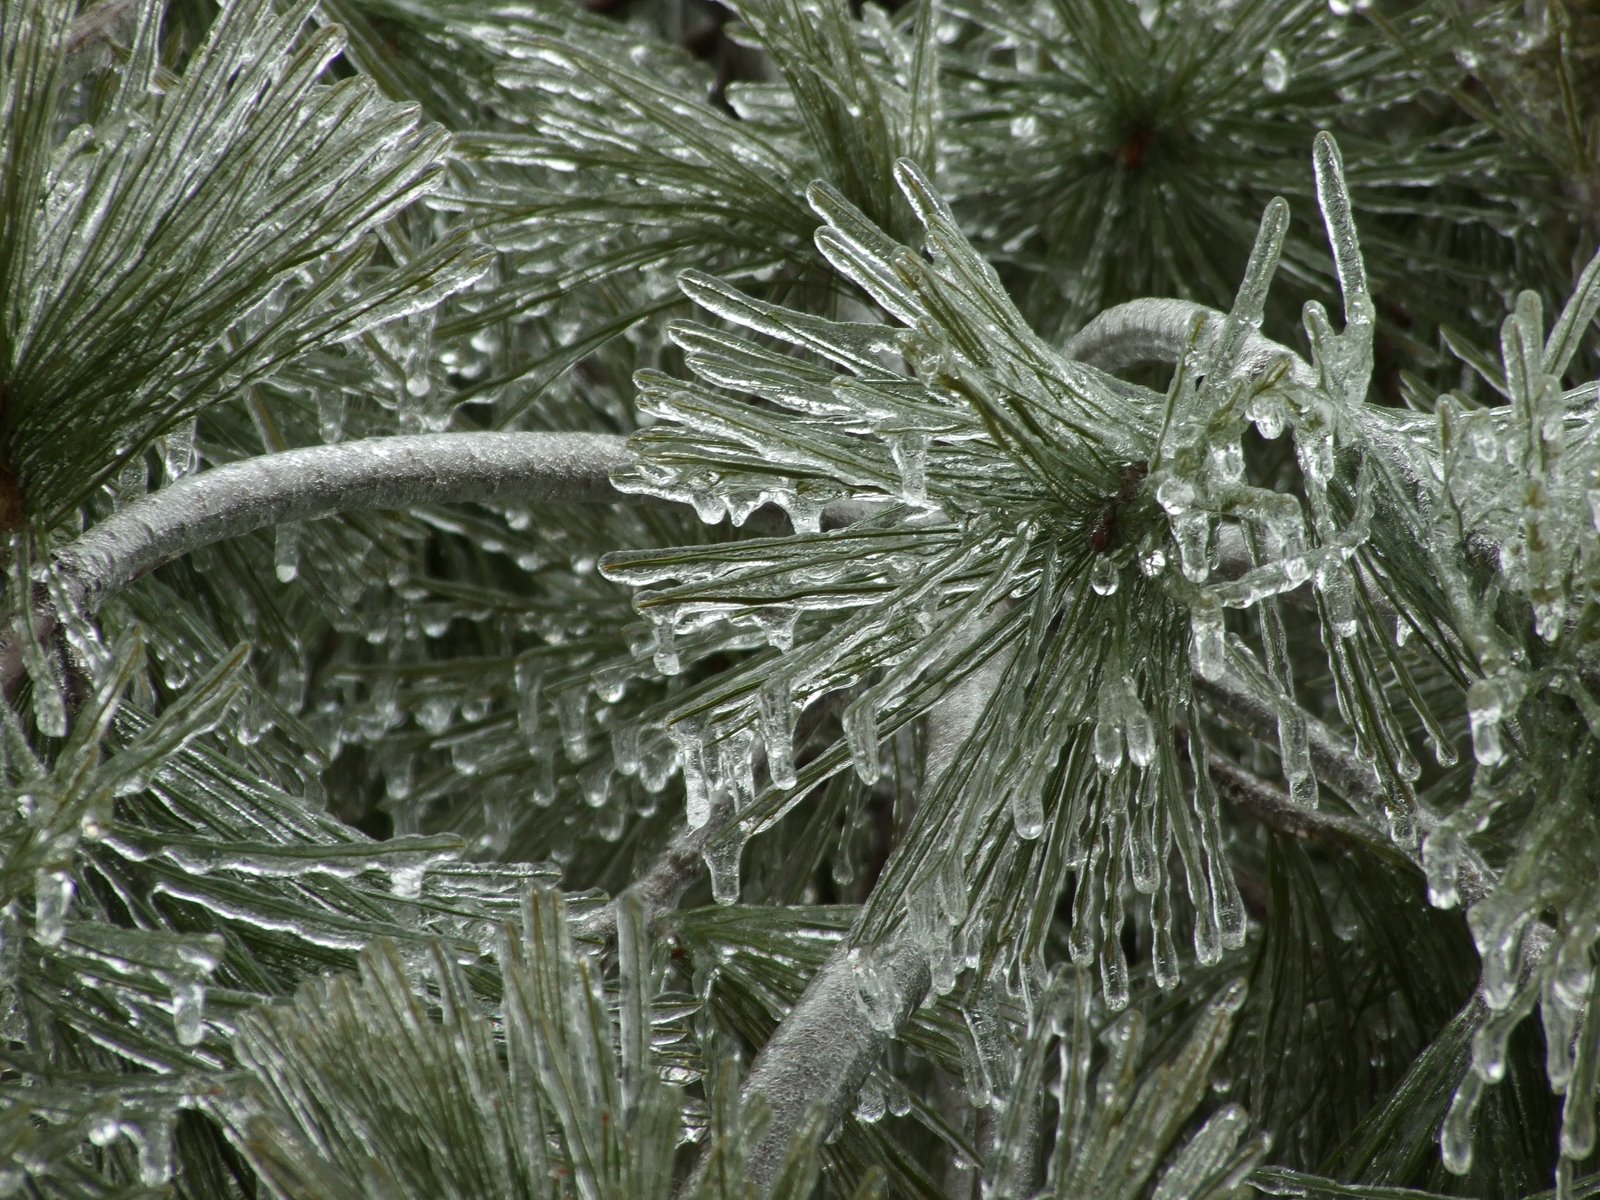 [Iced+Eastern+White+Pine+branches+01.jpg]